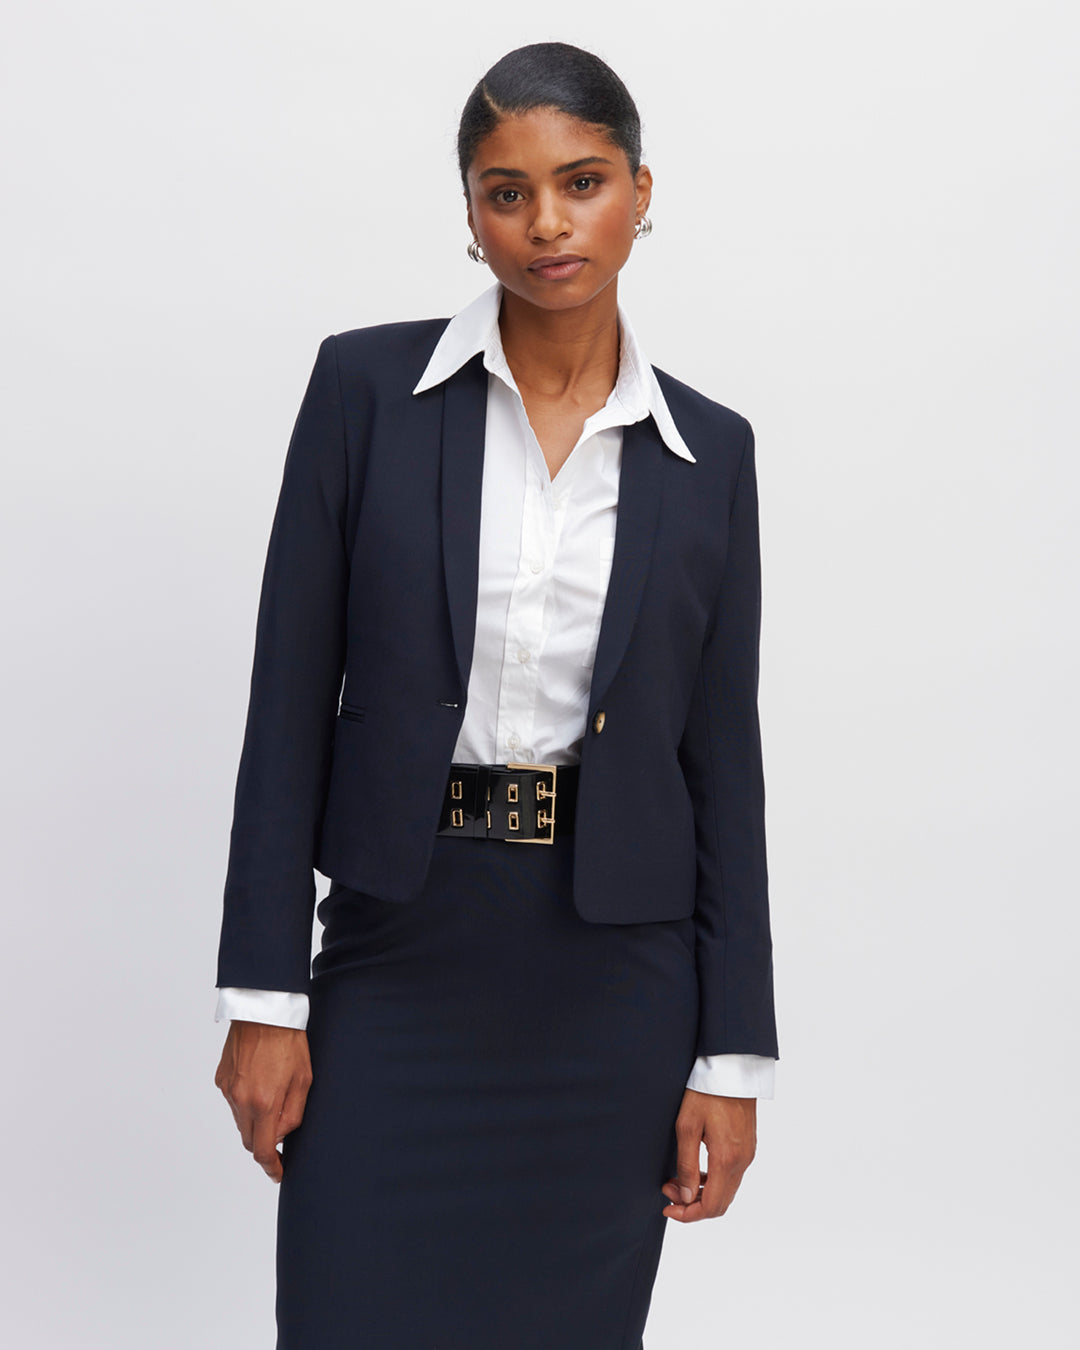 Tailored-jacket-navy-blue-Spencer-cut-Collar-shawl-Short-jacket-Two-pockets-underpiped-One-lining-luminous-Two-large-pockets-inside-Buttons-camel-17H10-tailored-jacket-for-women-paris-